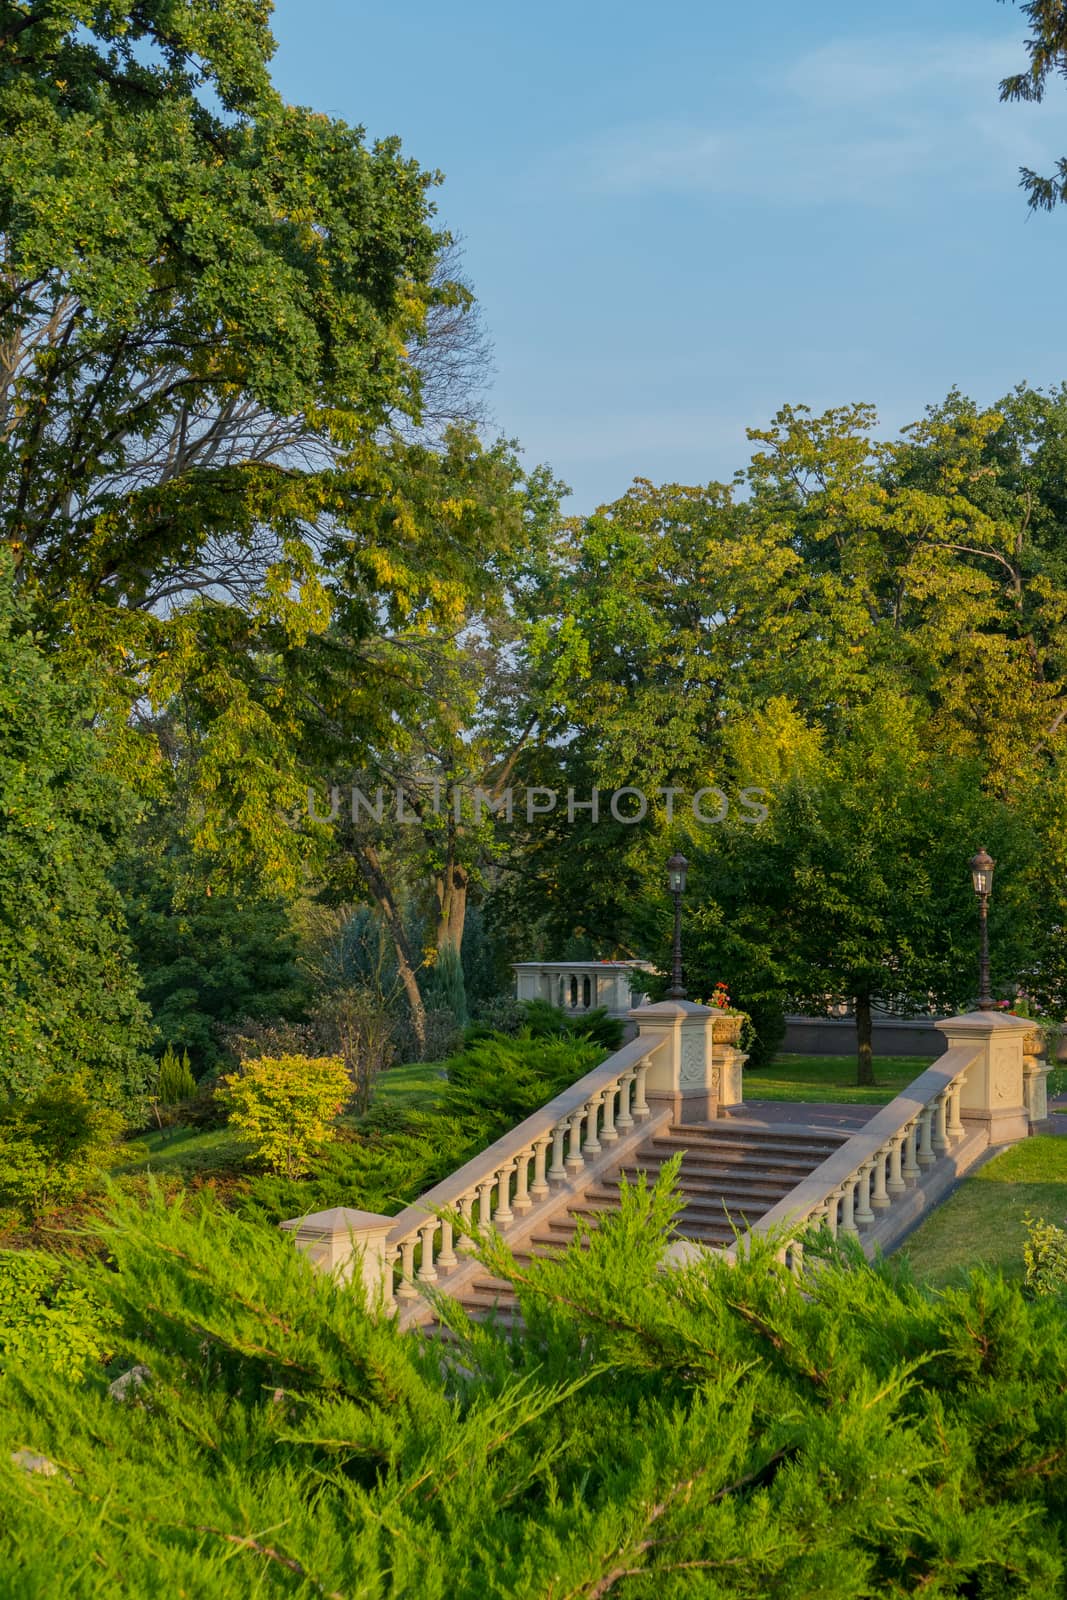 A staircase in a park with low handrails with lanterns for lighting in the evening is among trees and green lawns. by Adamchuk